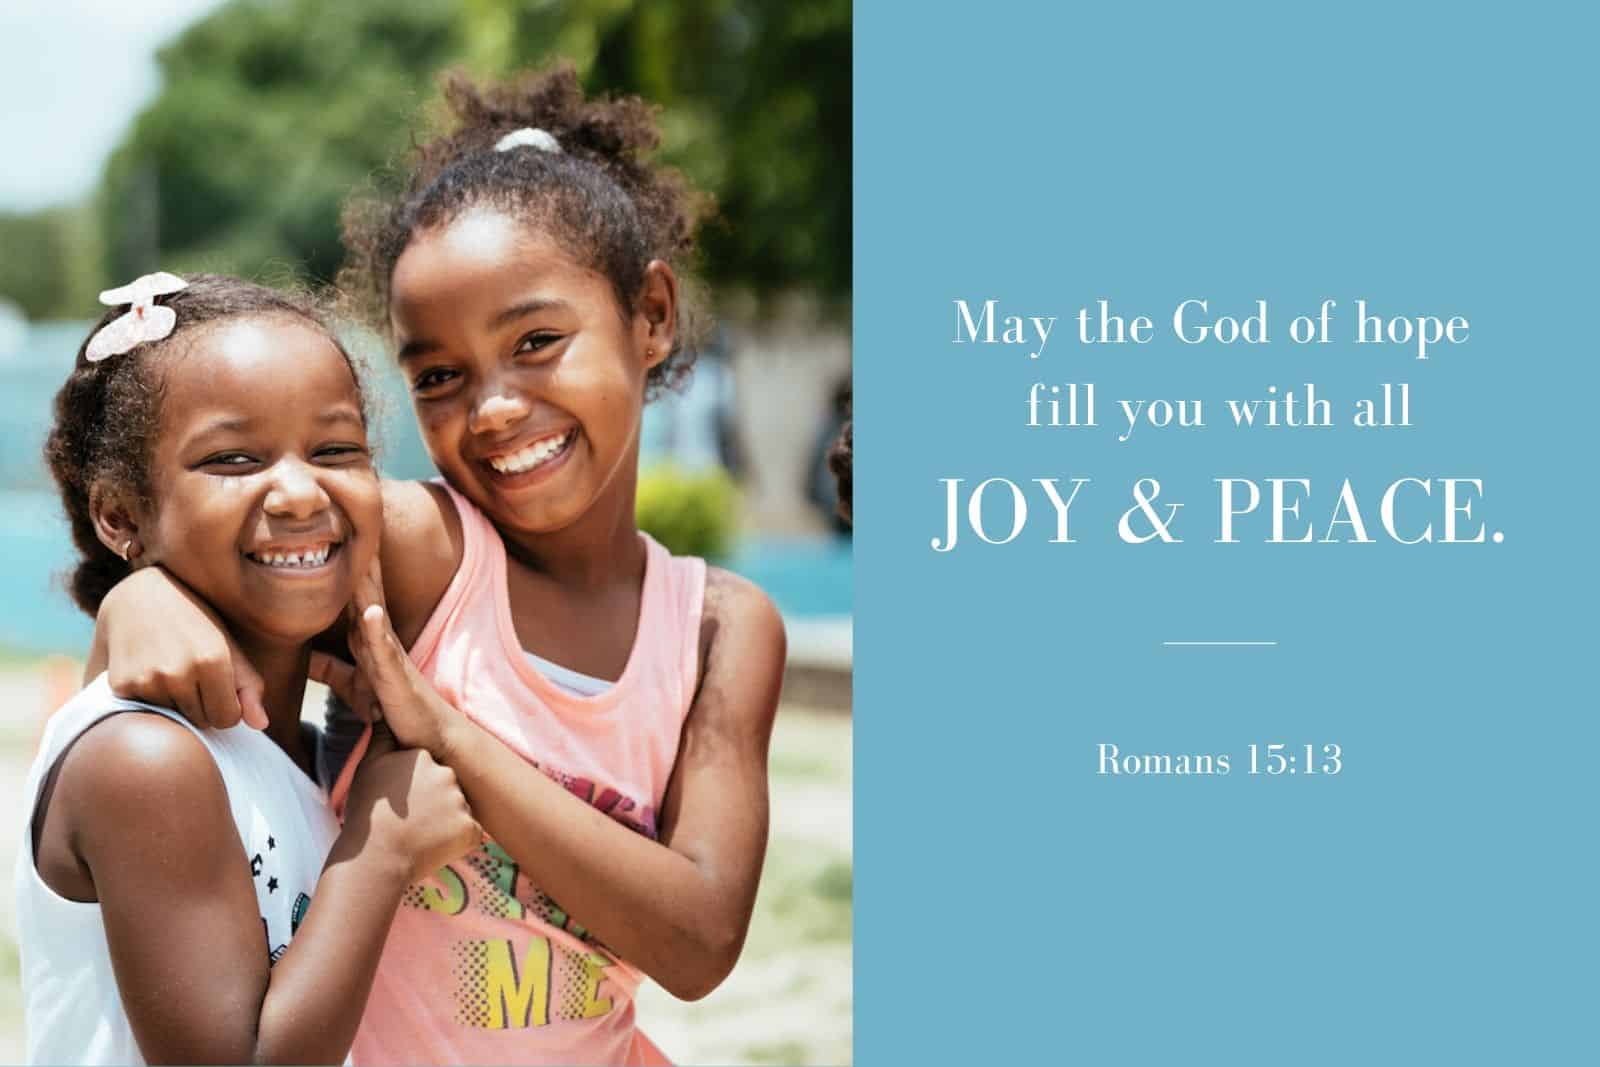 May the God of hope fill you with all joy and peace. Romans 15:13